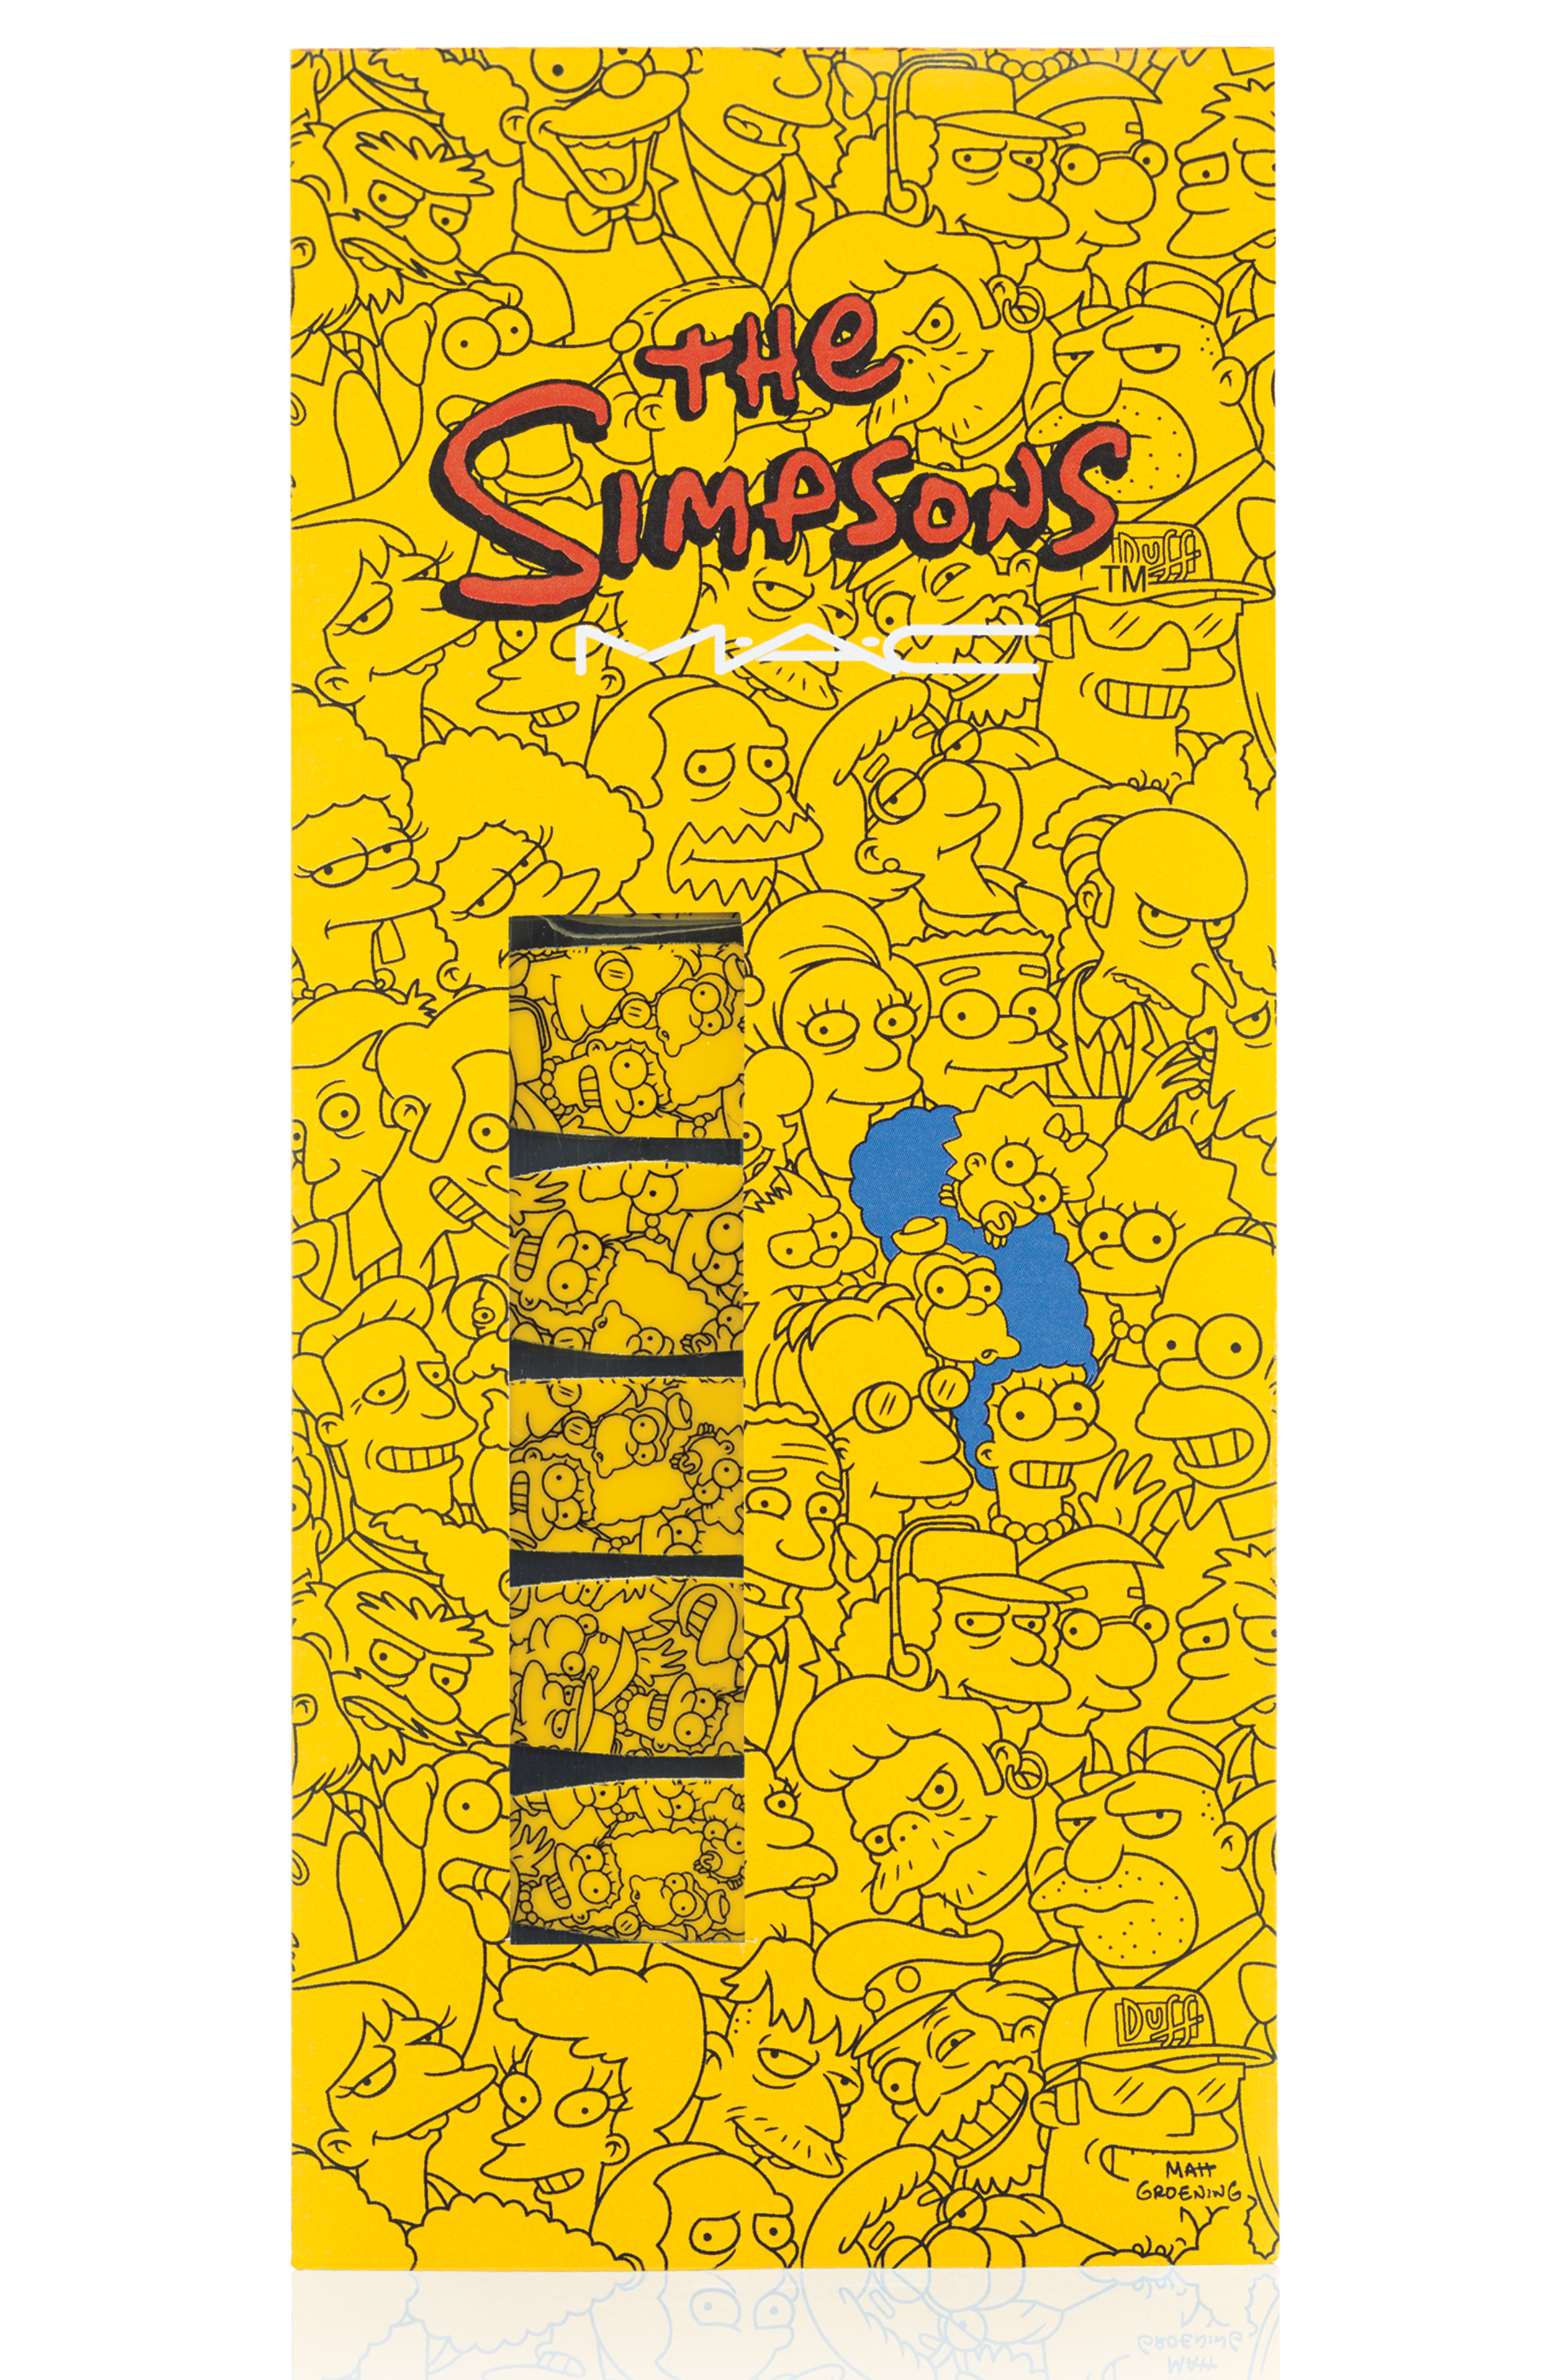 SIMPSONS-NAIL STICKERS-Marge Simpson’s Cutie-cles-300